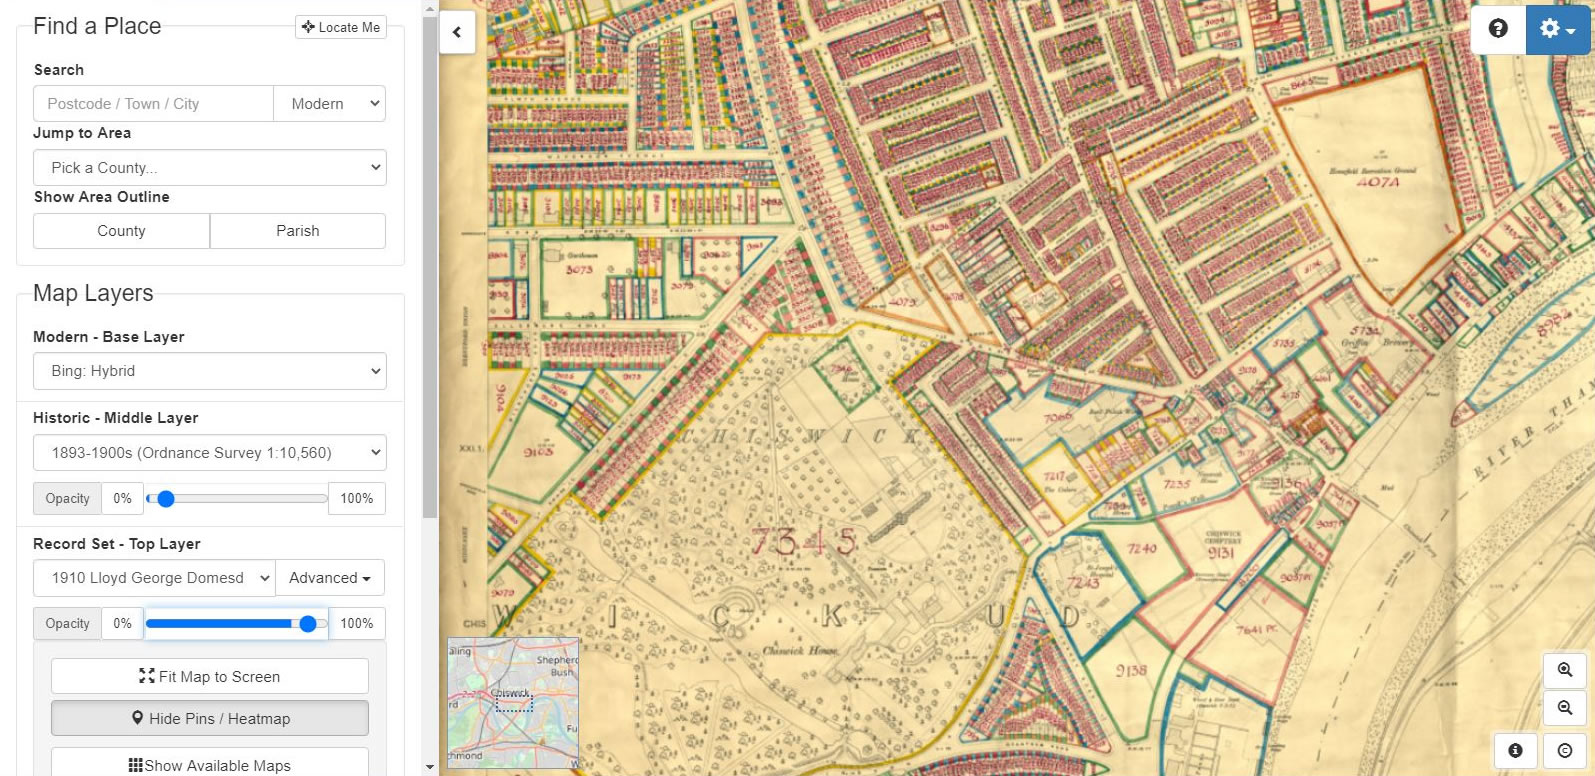 Chiswick House and former Ellesmere Road and Hogarth Lane located on the Lloyd George Survey Map